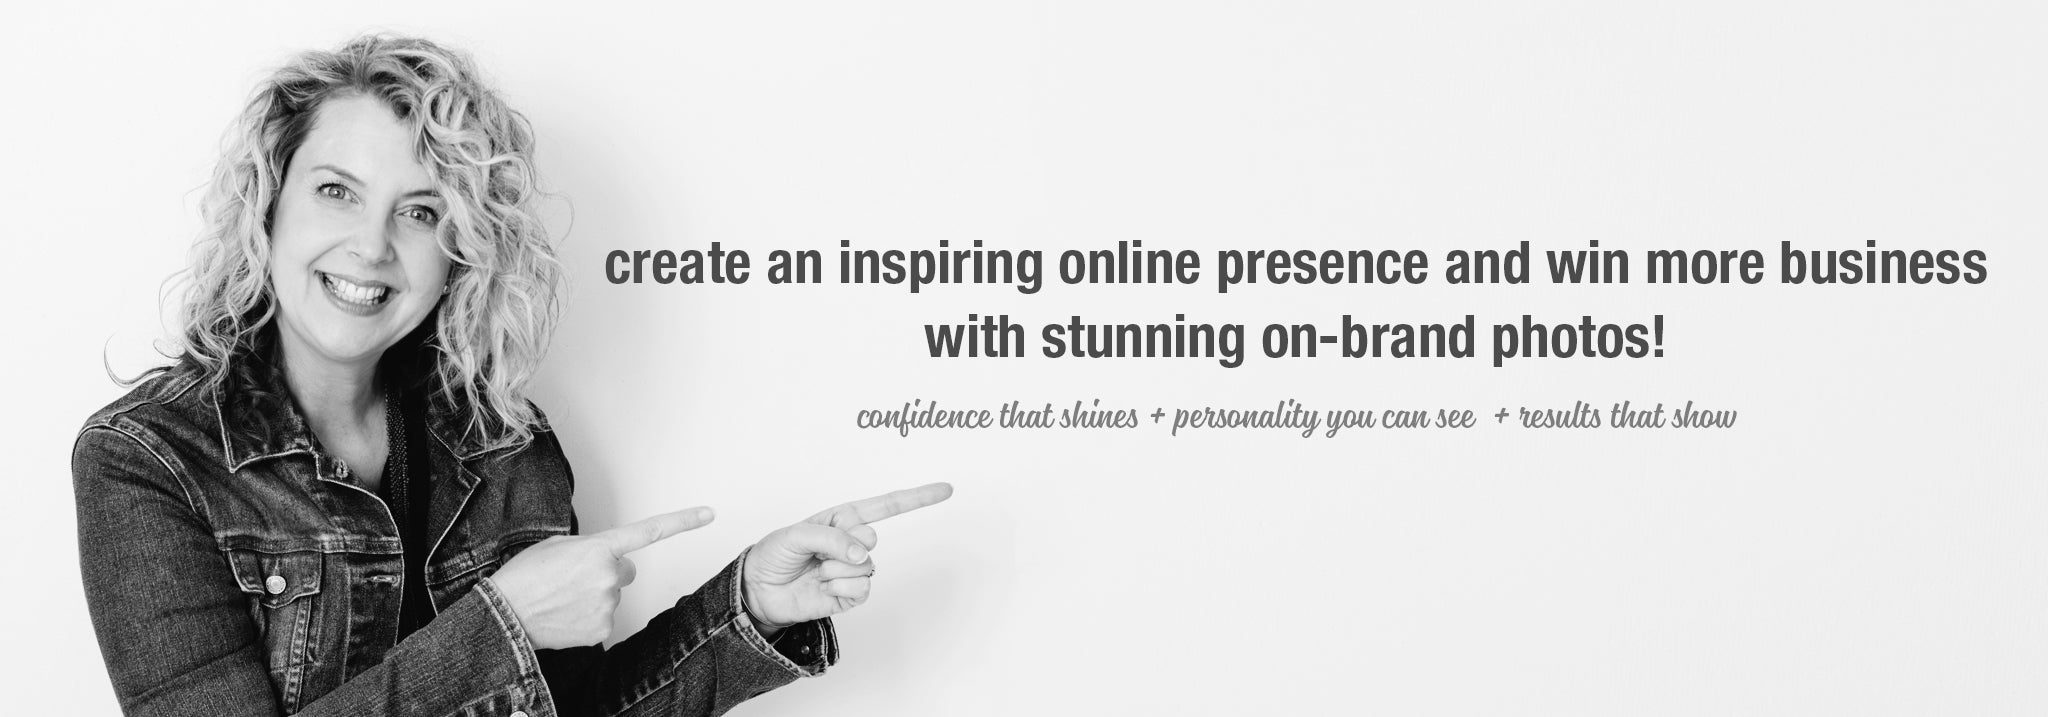 Create an amazing online presence with personal brand photos, content social media shots and website images